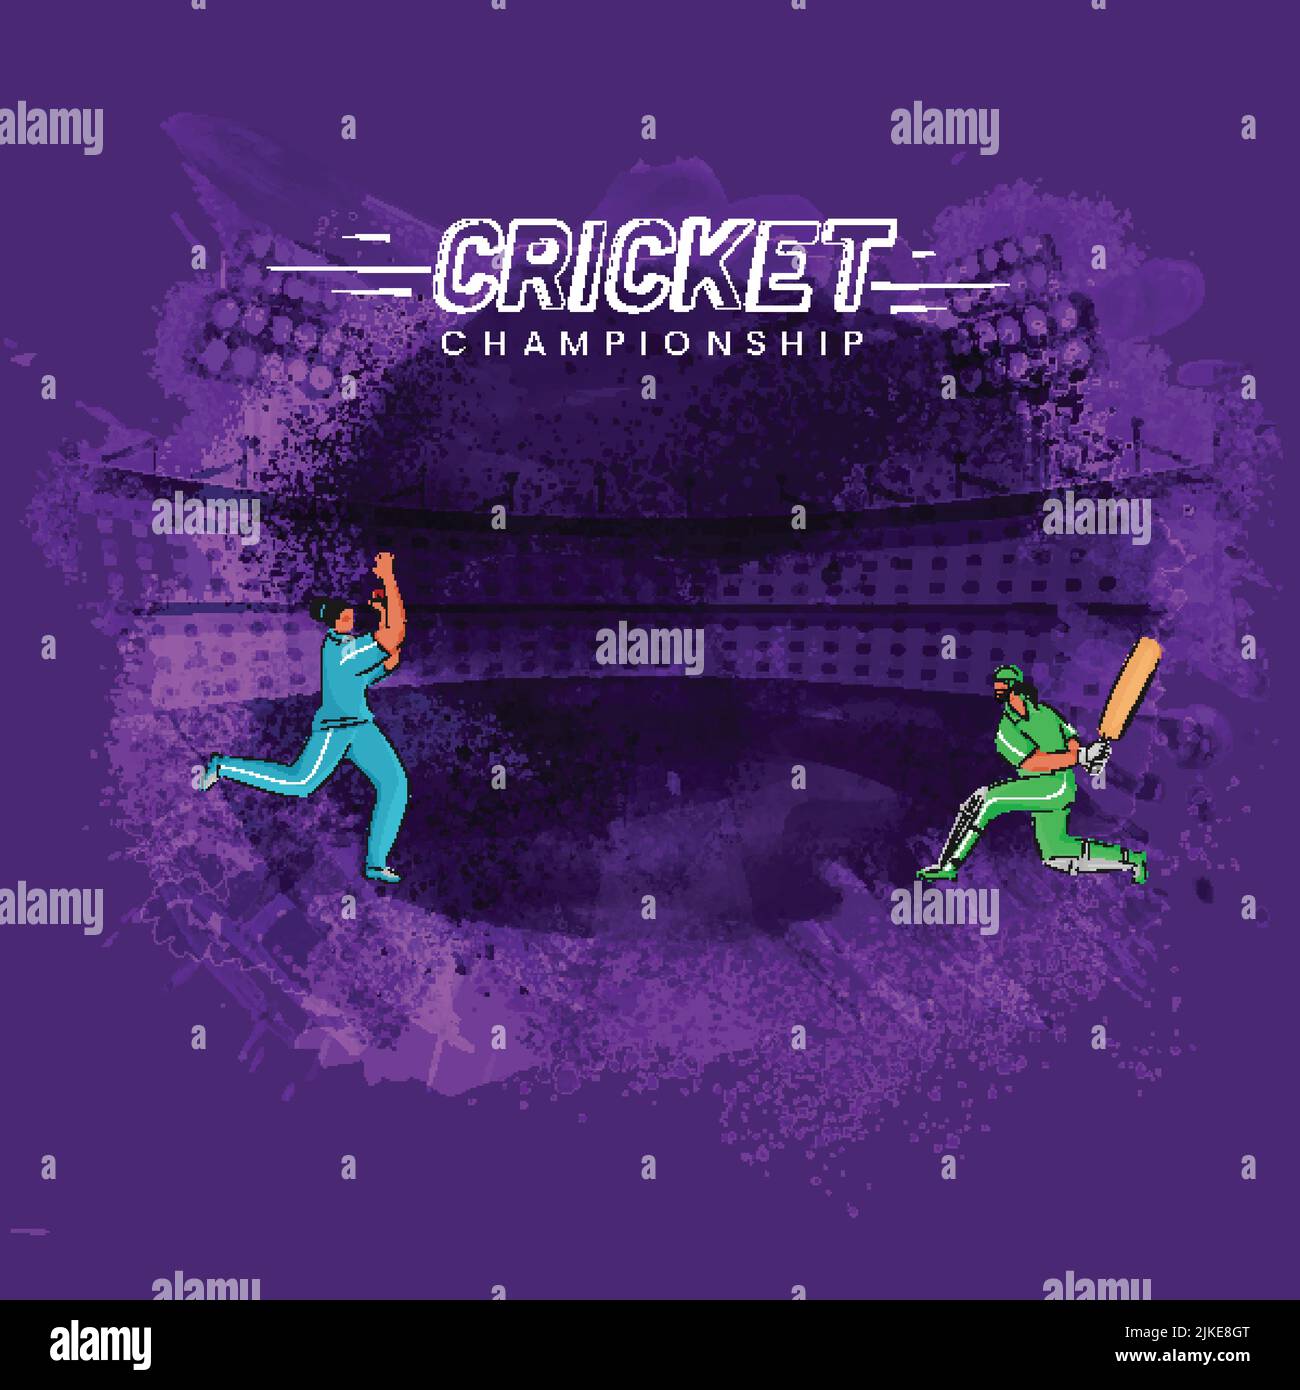 Participating Female Cricket Players Of India VS Pakistan On Purple Grunge Stadium Background For Championship Concept. Stock Vector